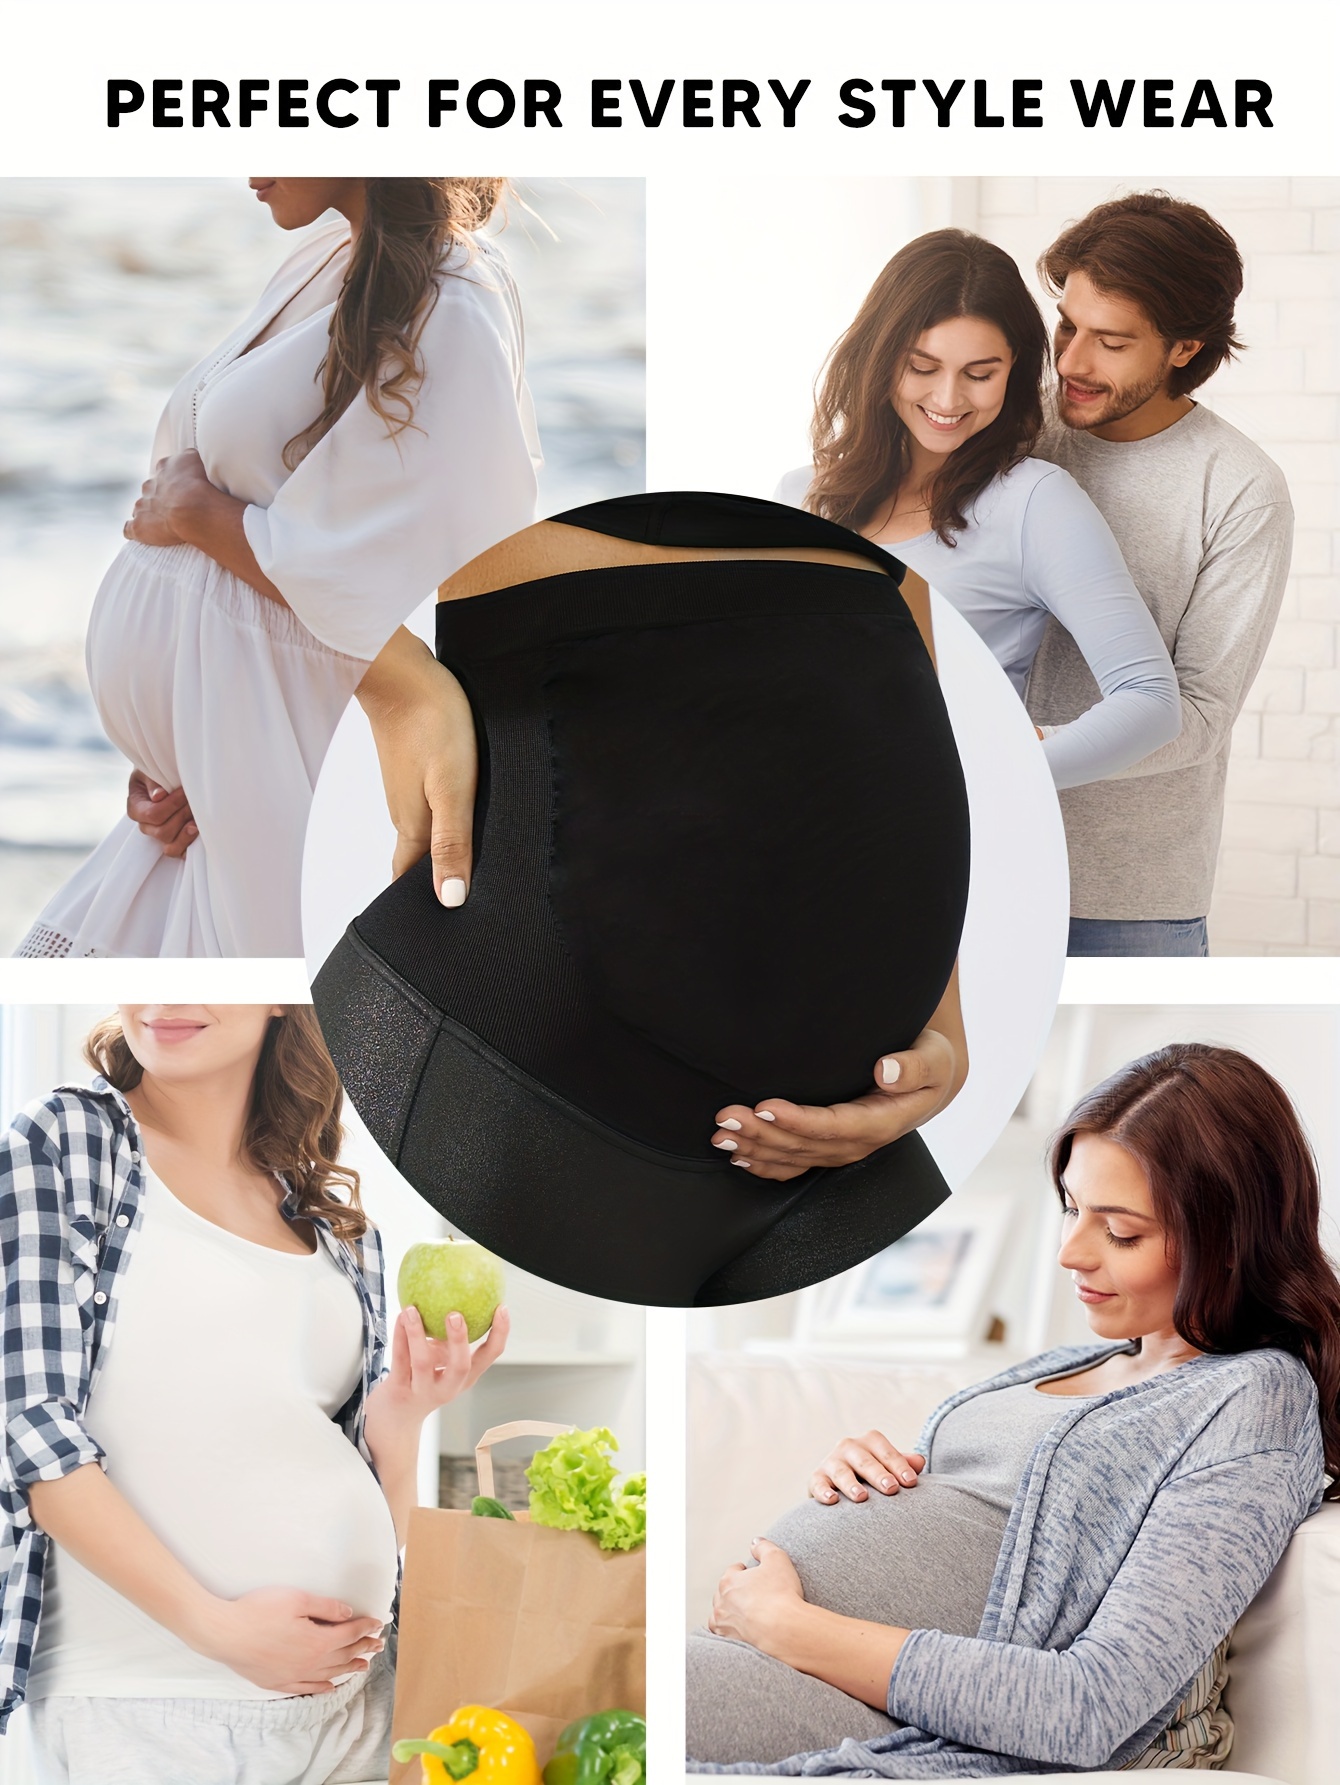 Pregnant Women's High Waist And Belly Support Underwear For Pregnancy  Maternity